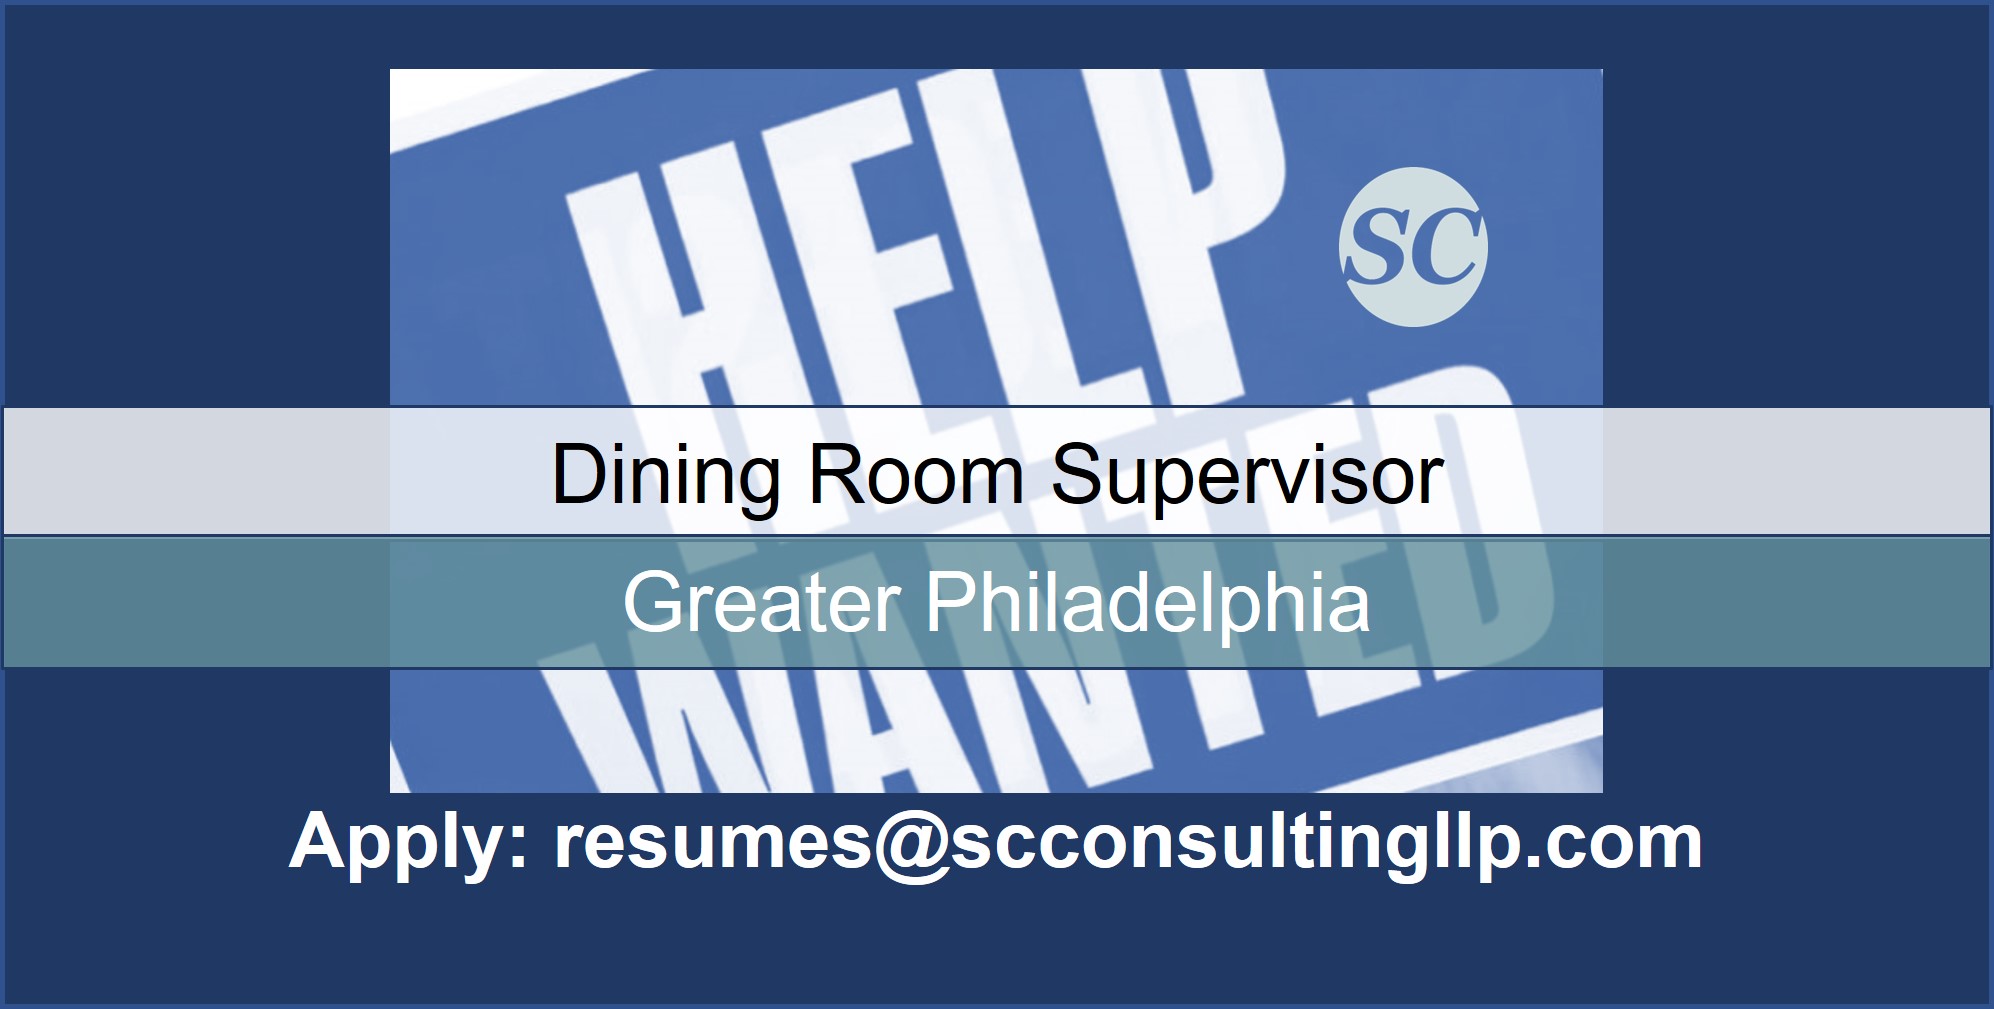 Annual Openings For Dining Room Supervisor